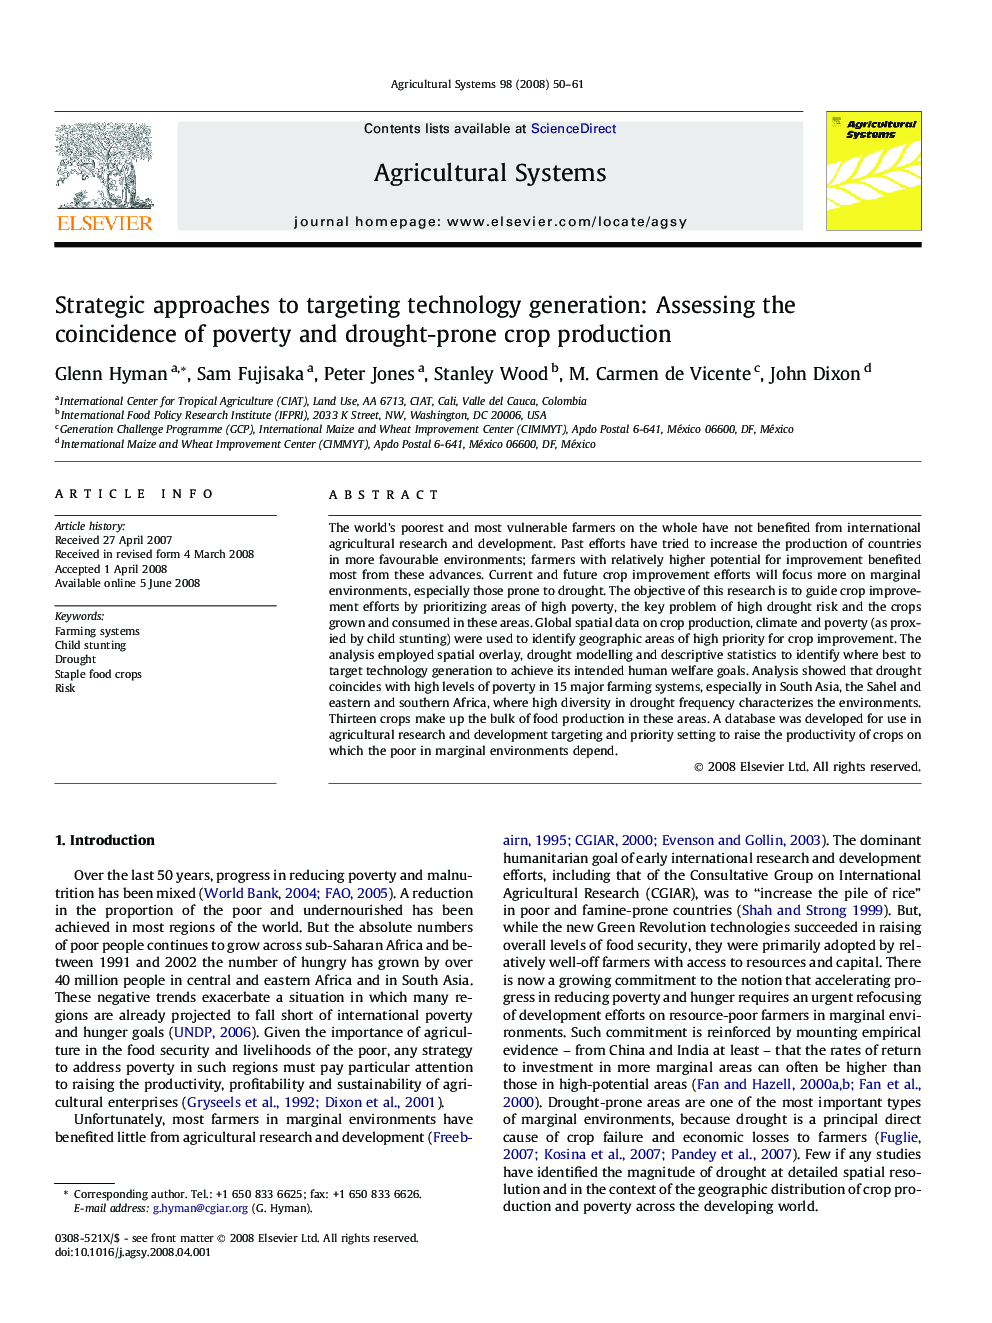 Strategic approaches to targeting technology generation: Assessing the coincidence of poverty and drought-prone crop production